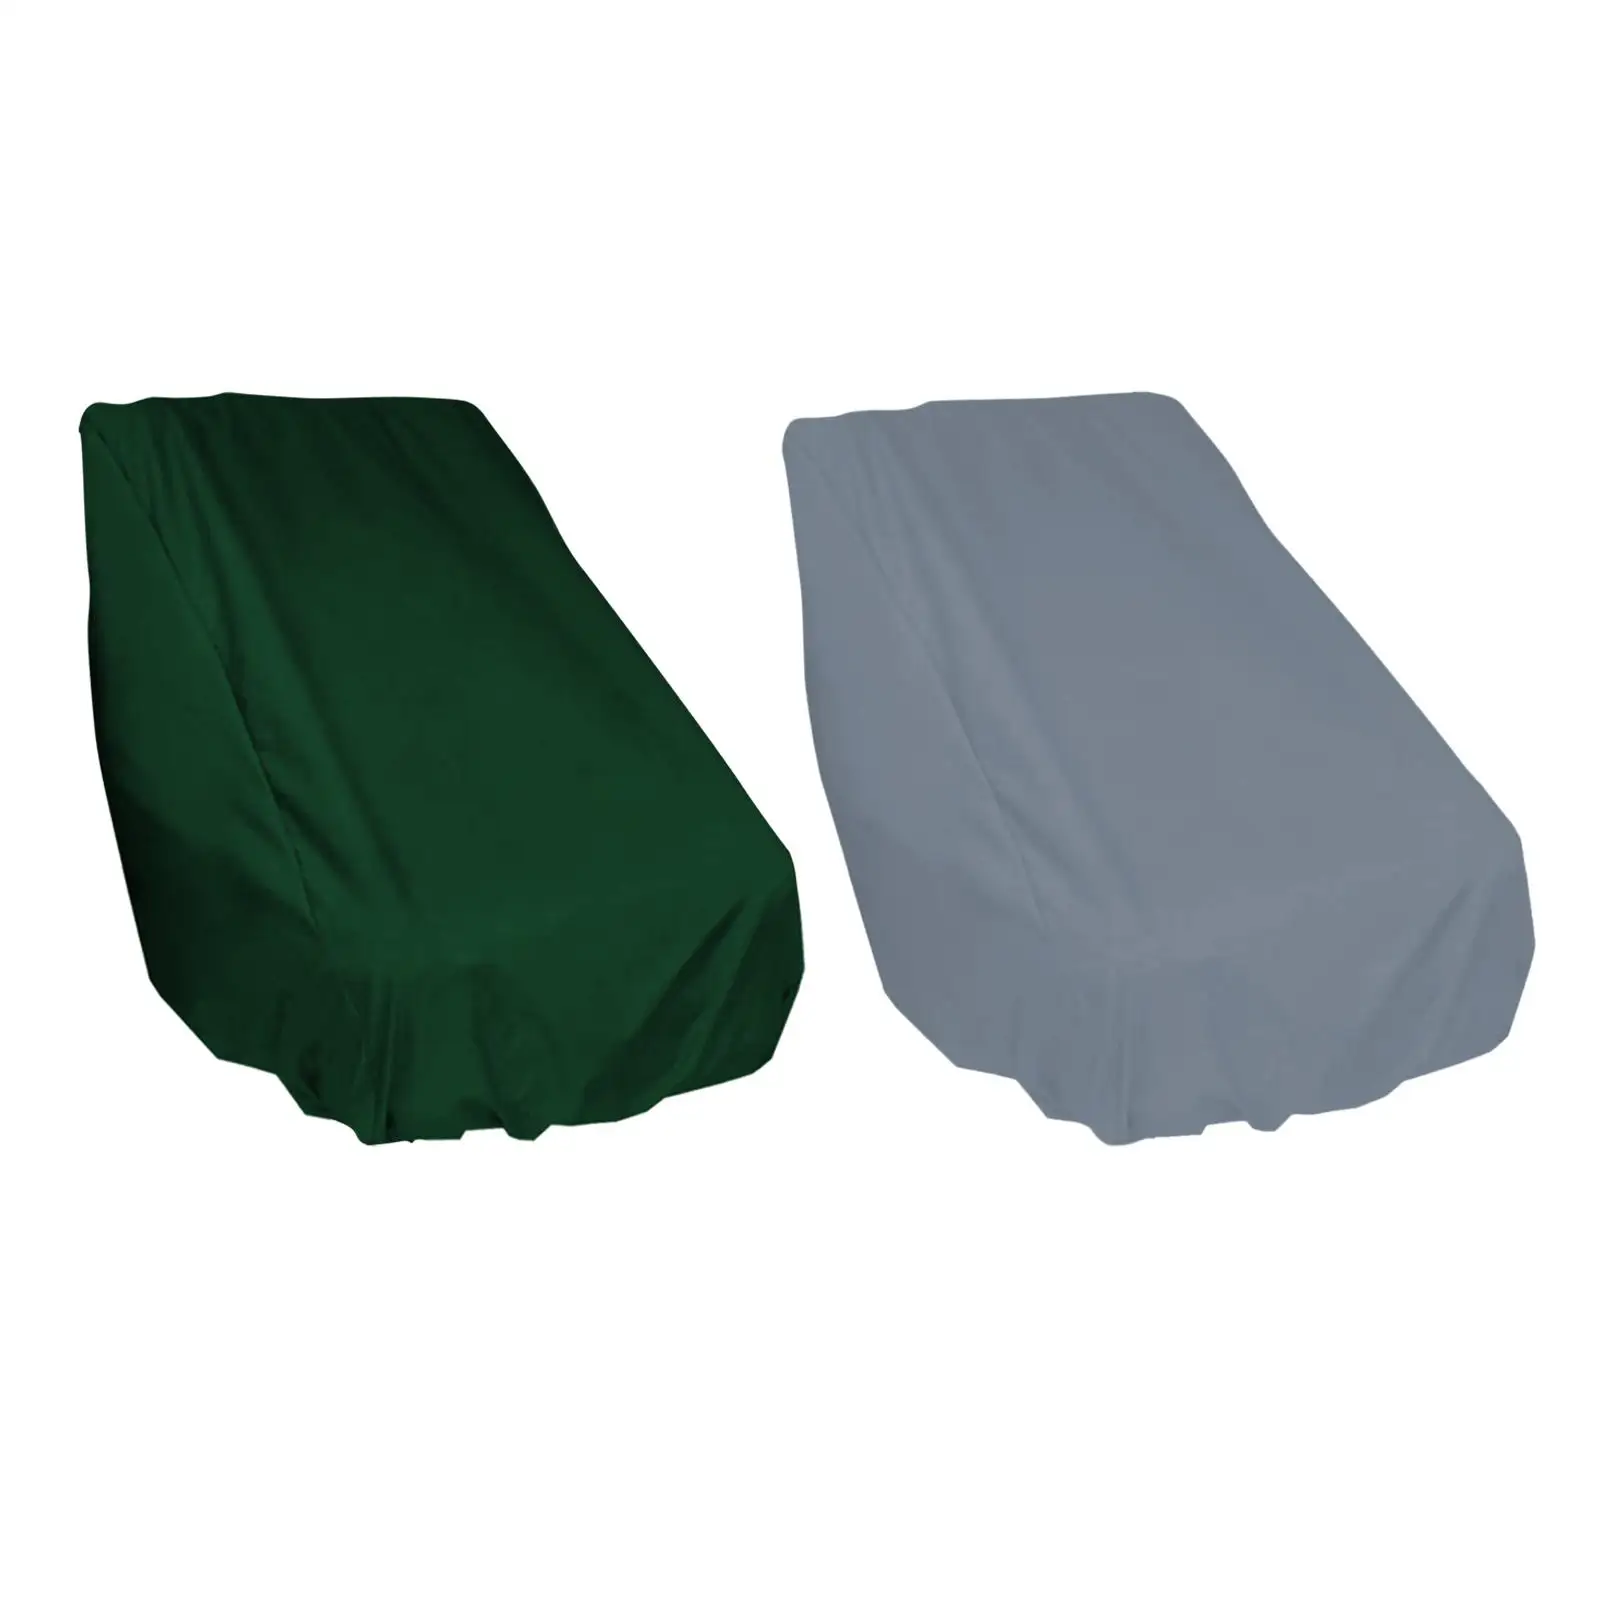 Marine Canvas Boat Seat Covers, Weather Resistant Fabric Protects Captains Chair from The Elements